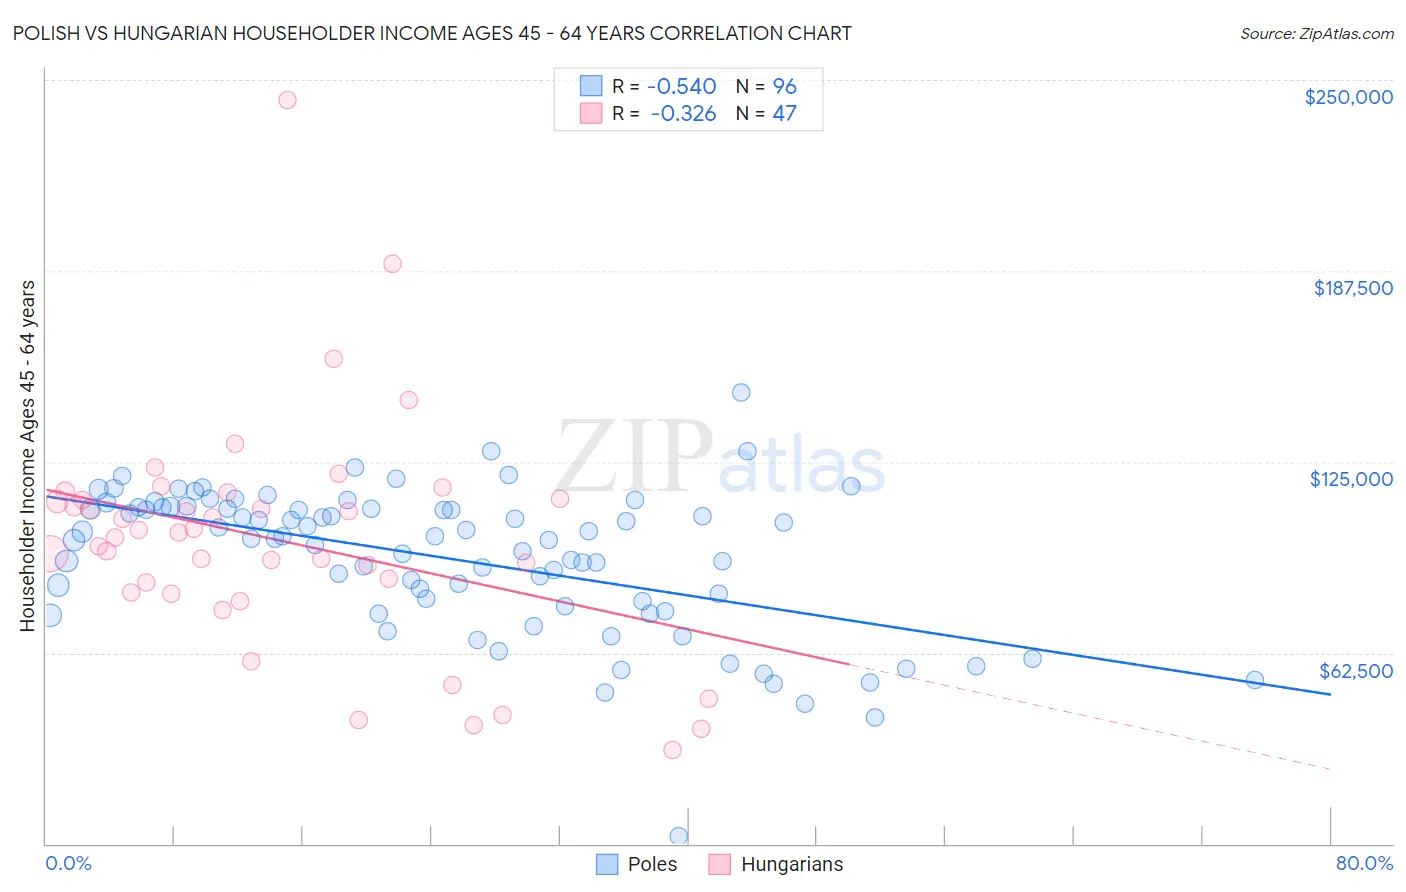 Polish vs Hungarian Householder Income Ages 45 - 64 years